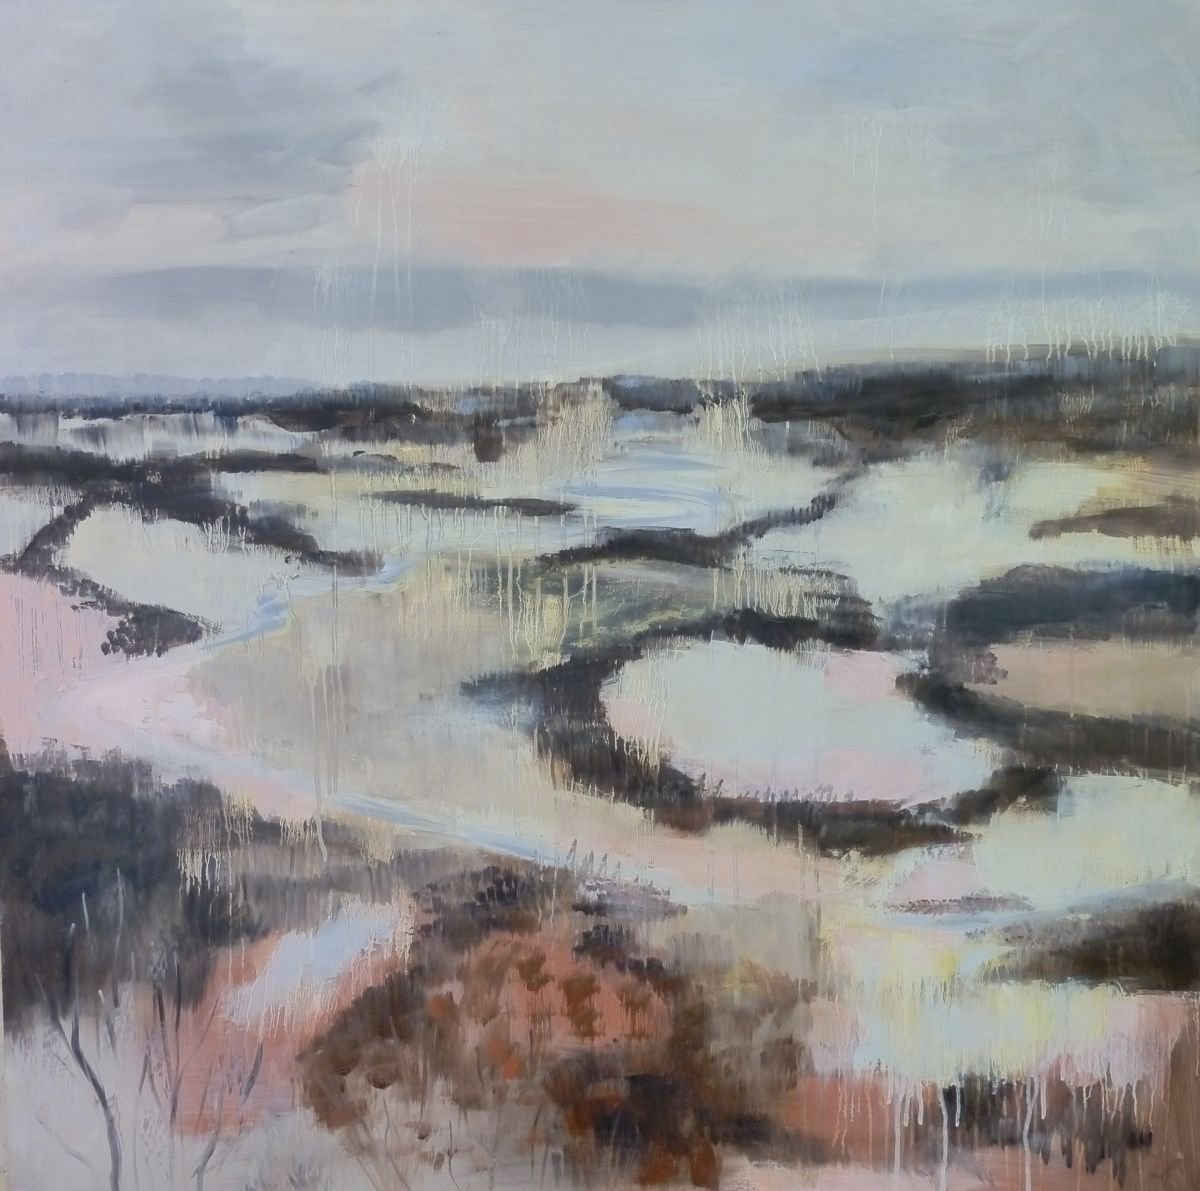 Ouse valley 1 by Cecilia Virlombier